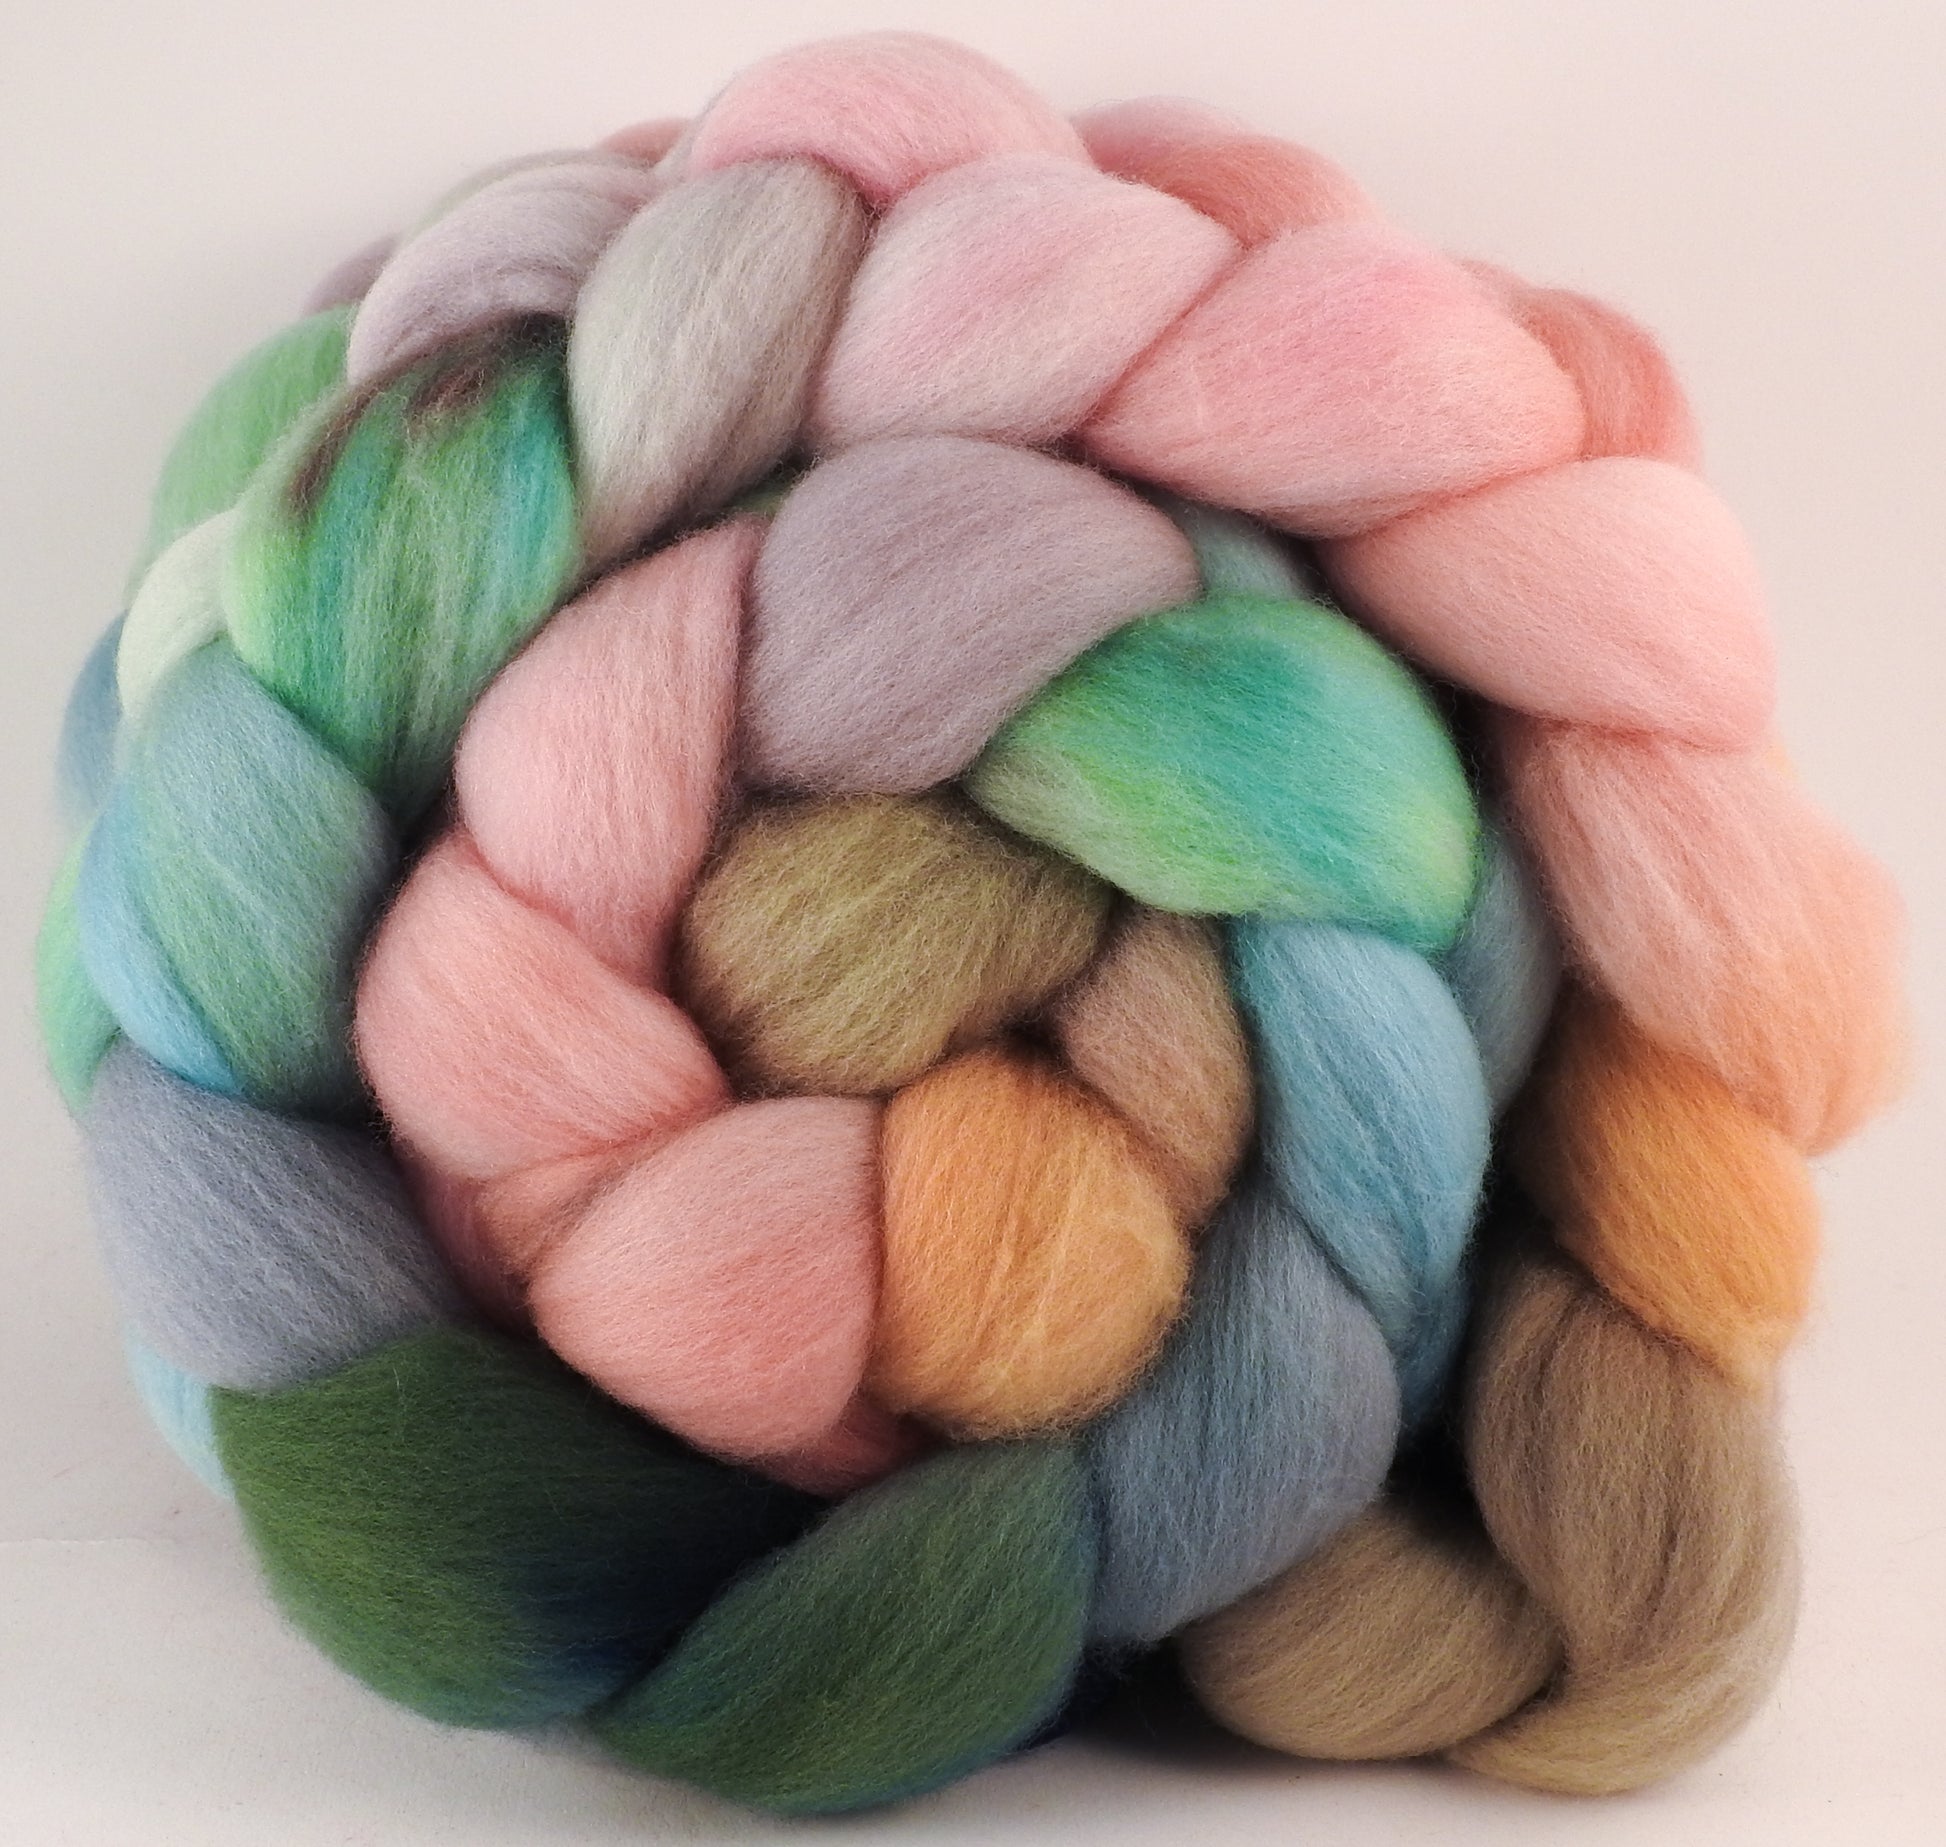 Hand dyed top for spinning - Shabby Chic - (5.3 oz.) Organic Polwarth - Inglenook Fibers